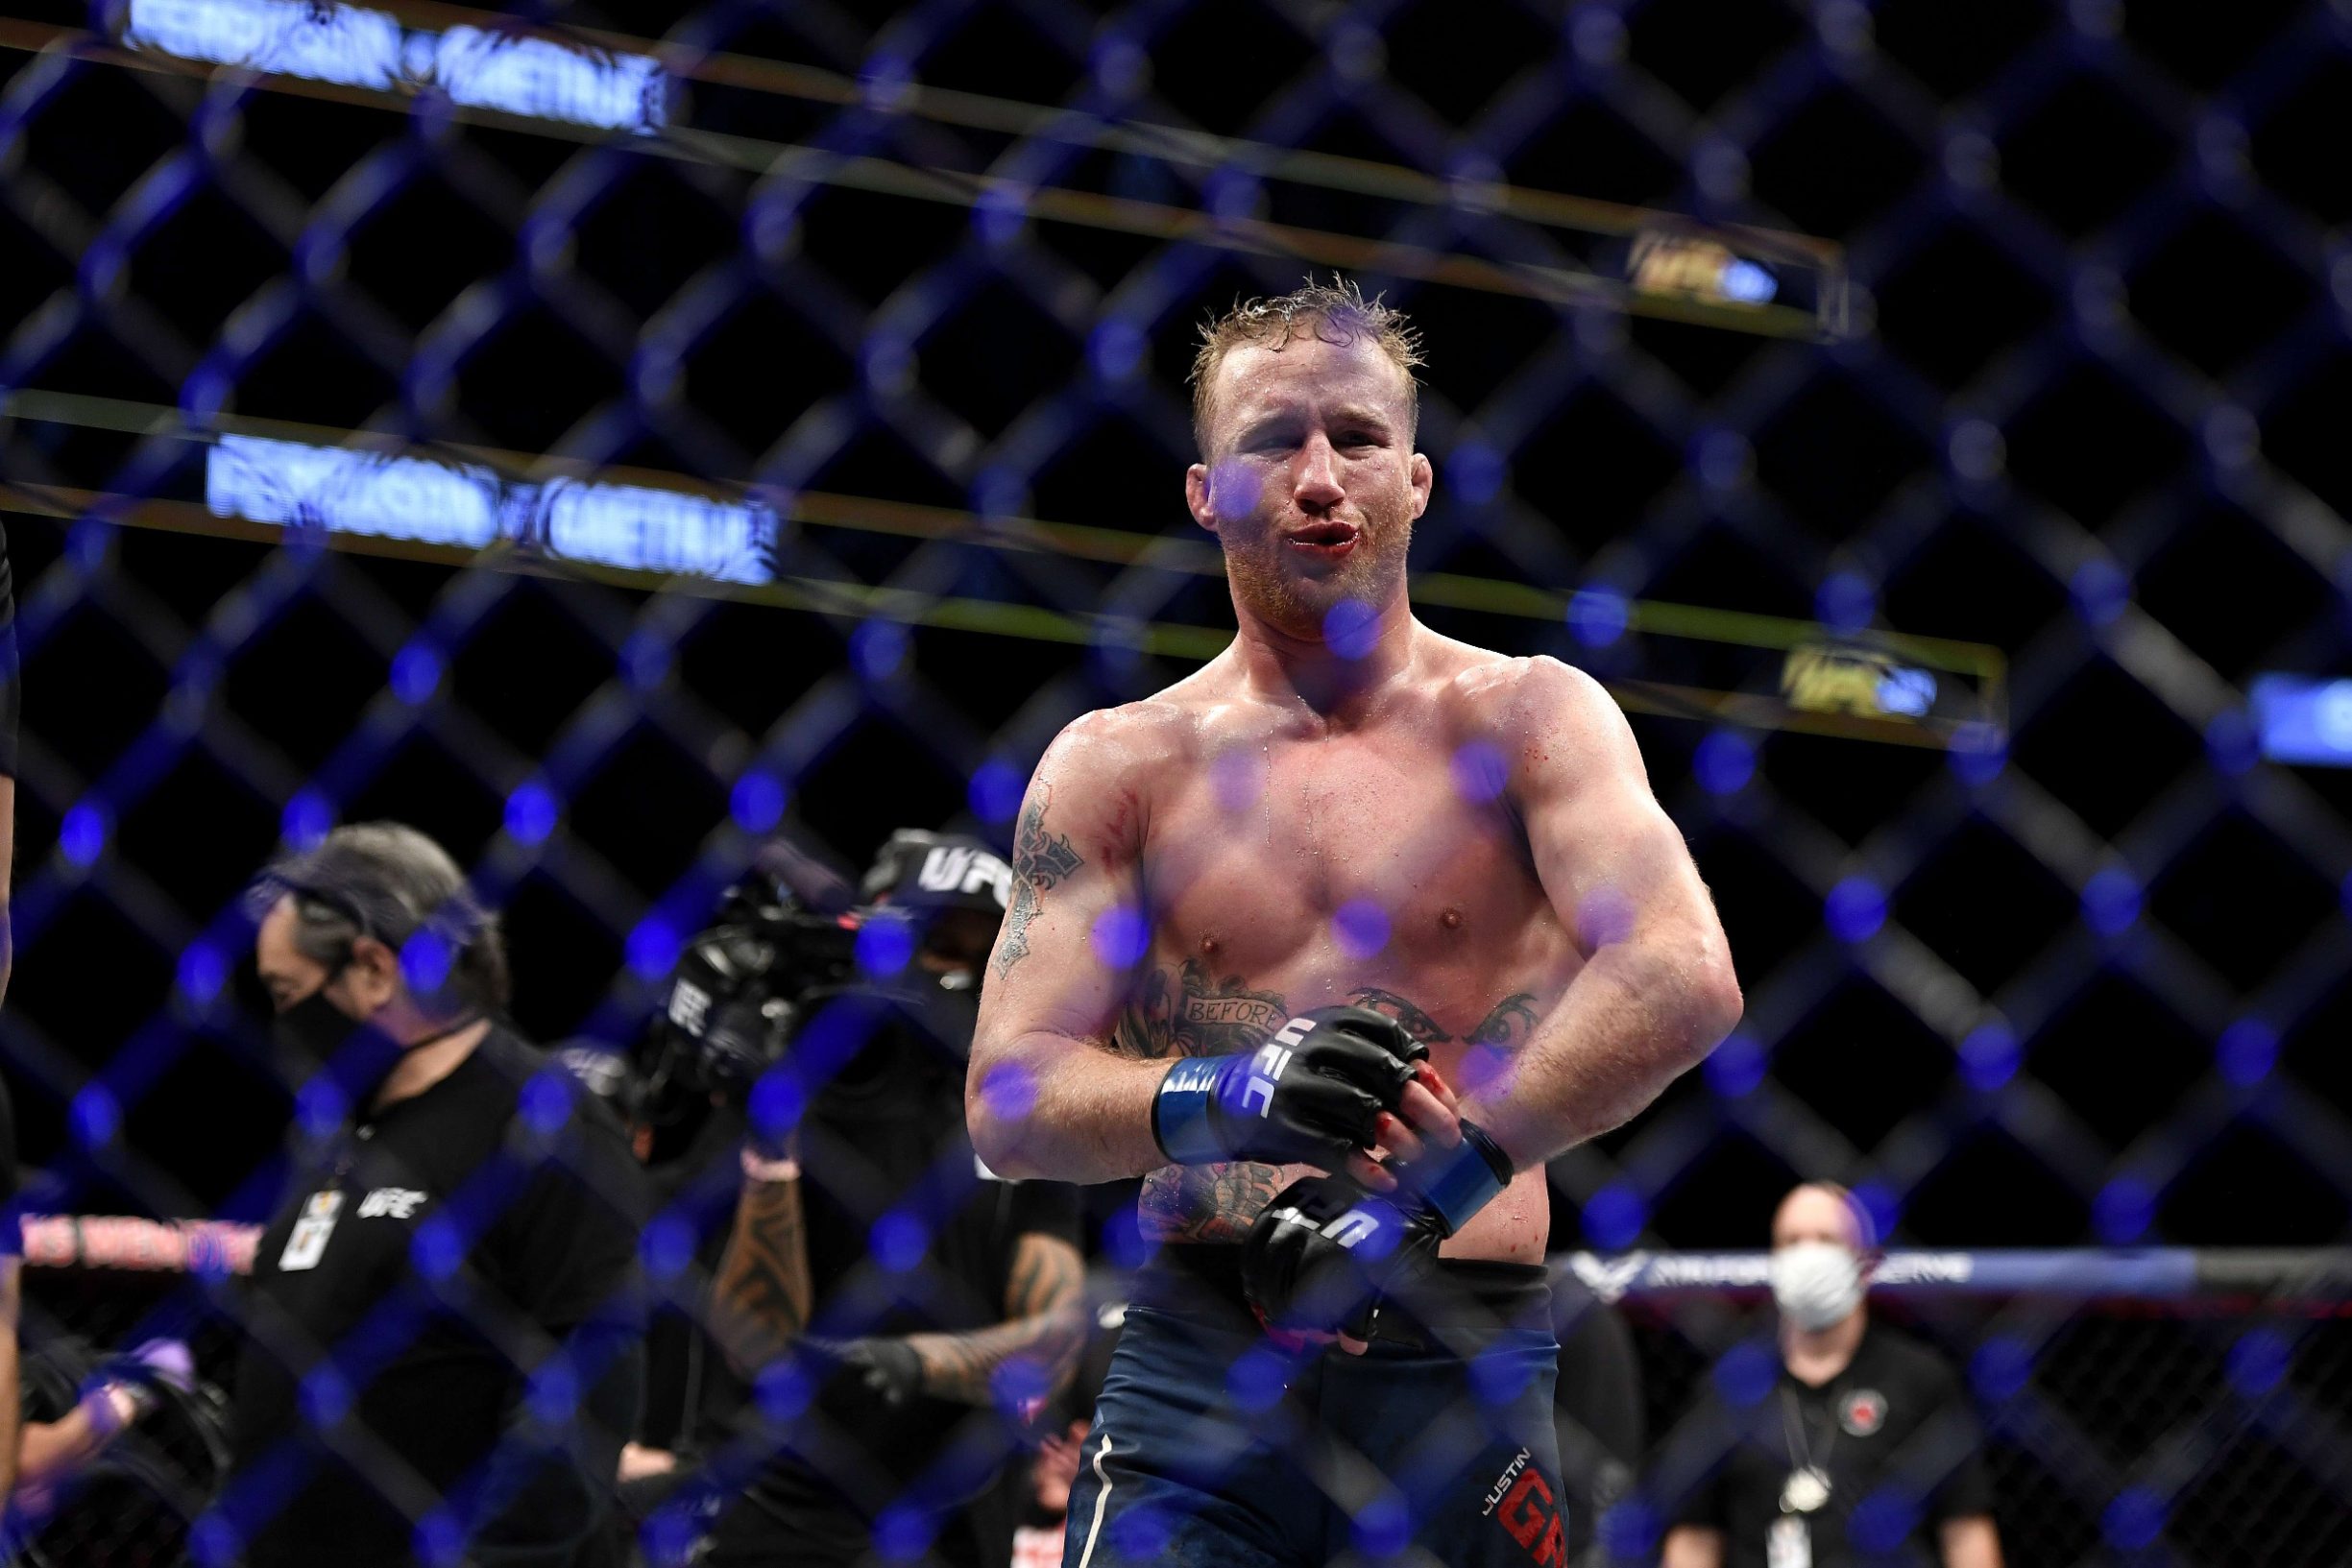 JACKSONVILLE, FLORIDA - MAY 09: Justin Gaethje of the United States celebrates after defeating Tony Ferguson of the United States in their Interim lightweight title fight during UFC 249 at VyStar Veterans Memorial Arena on May 09, 2020 in Jacksonville, Florida.   Douglas P. DeFelice/Getty Images/AFP
== FOR NEWSPAPERS, INTERNET, TELCOS & TELEVISION USE ONLY ==